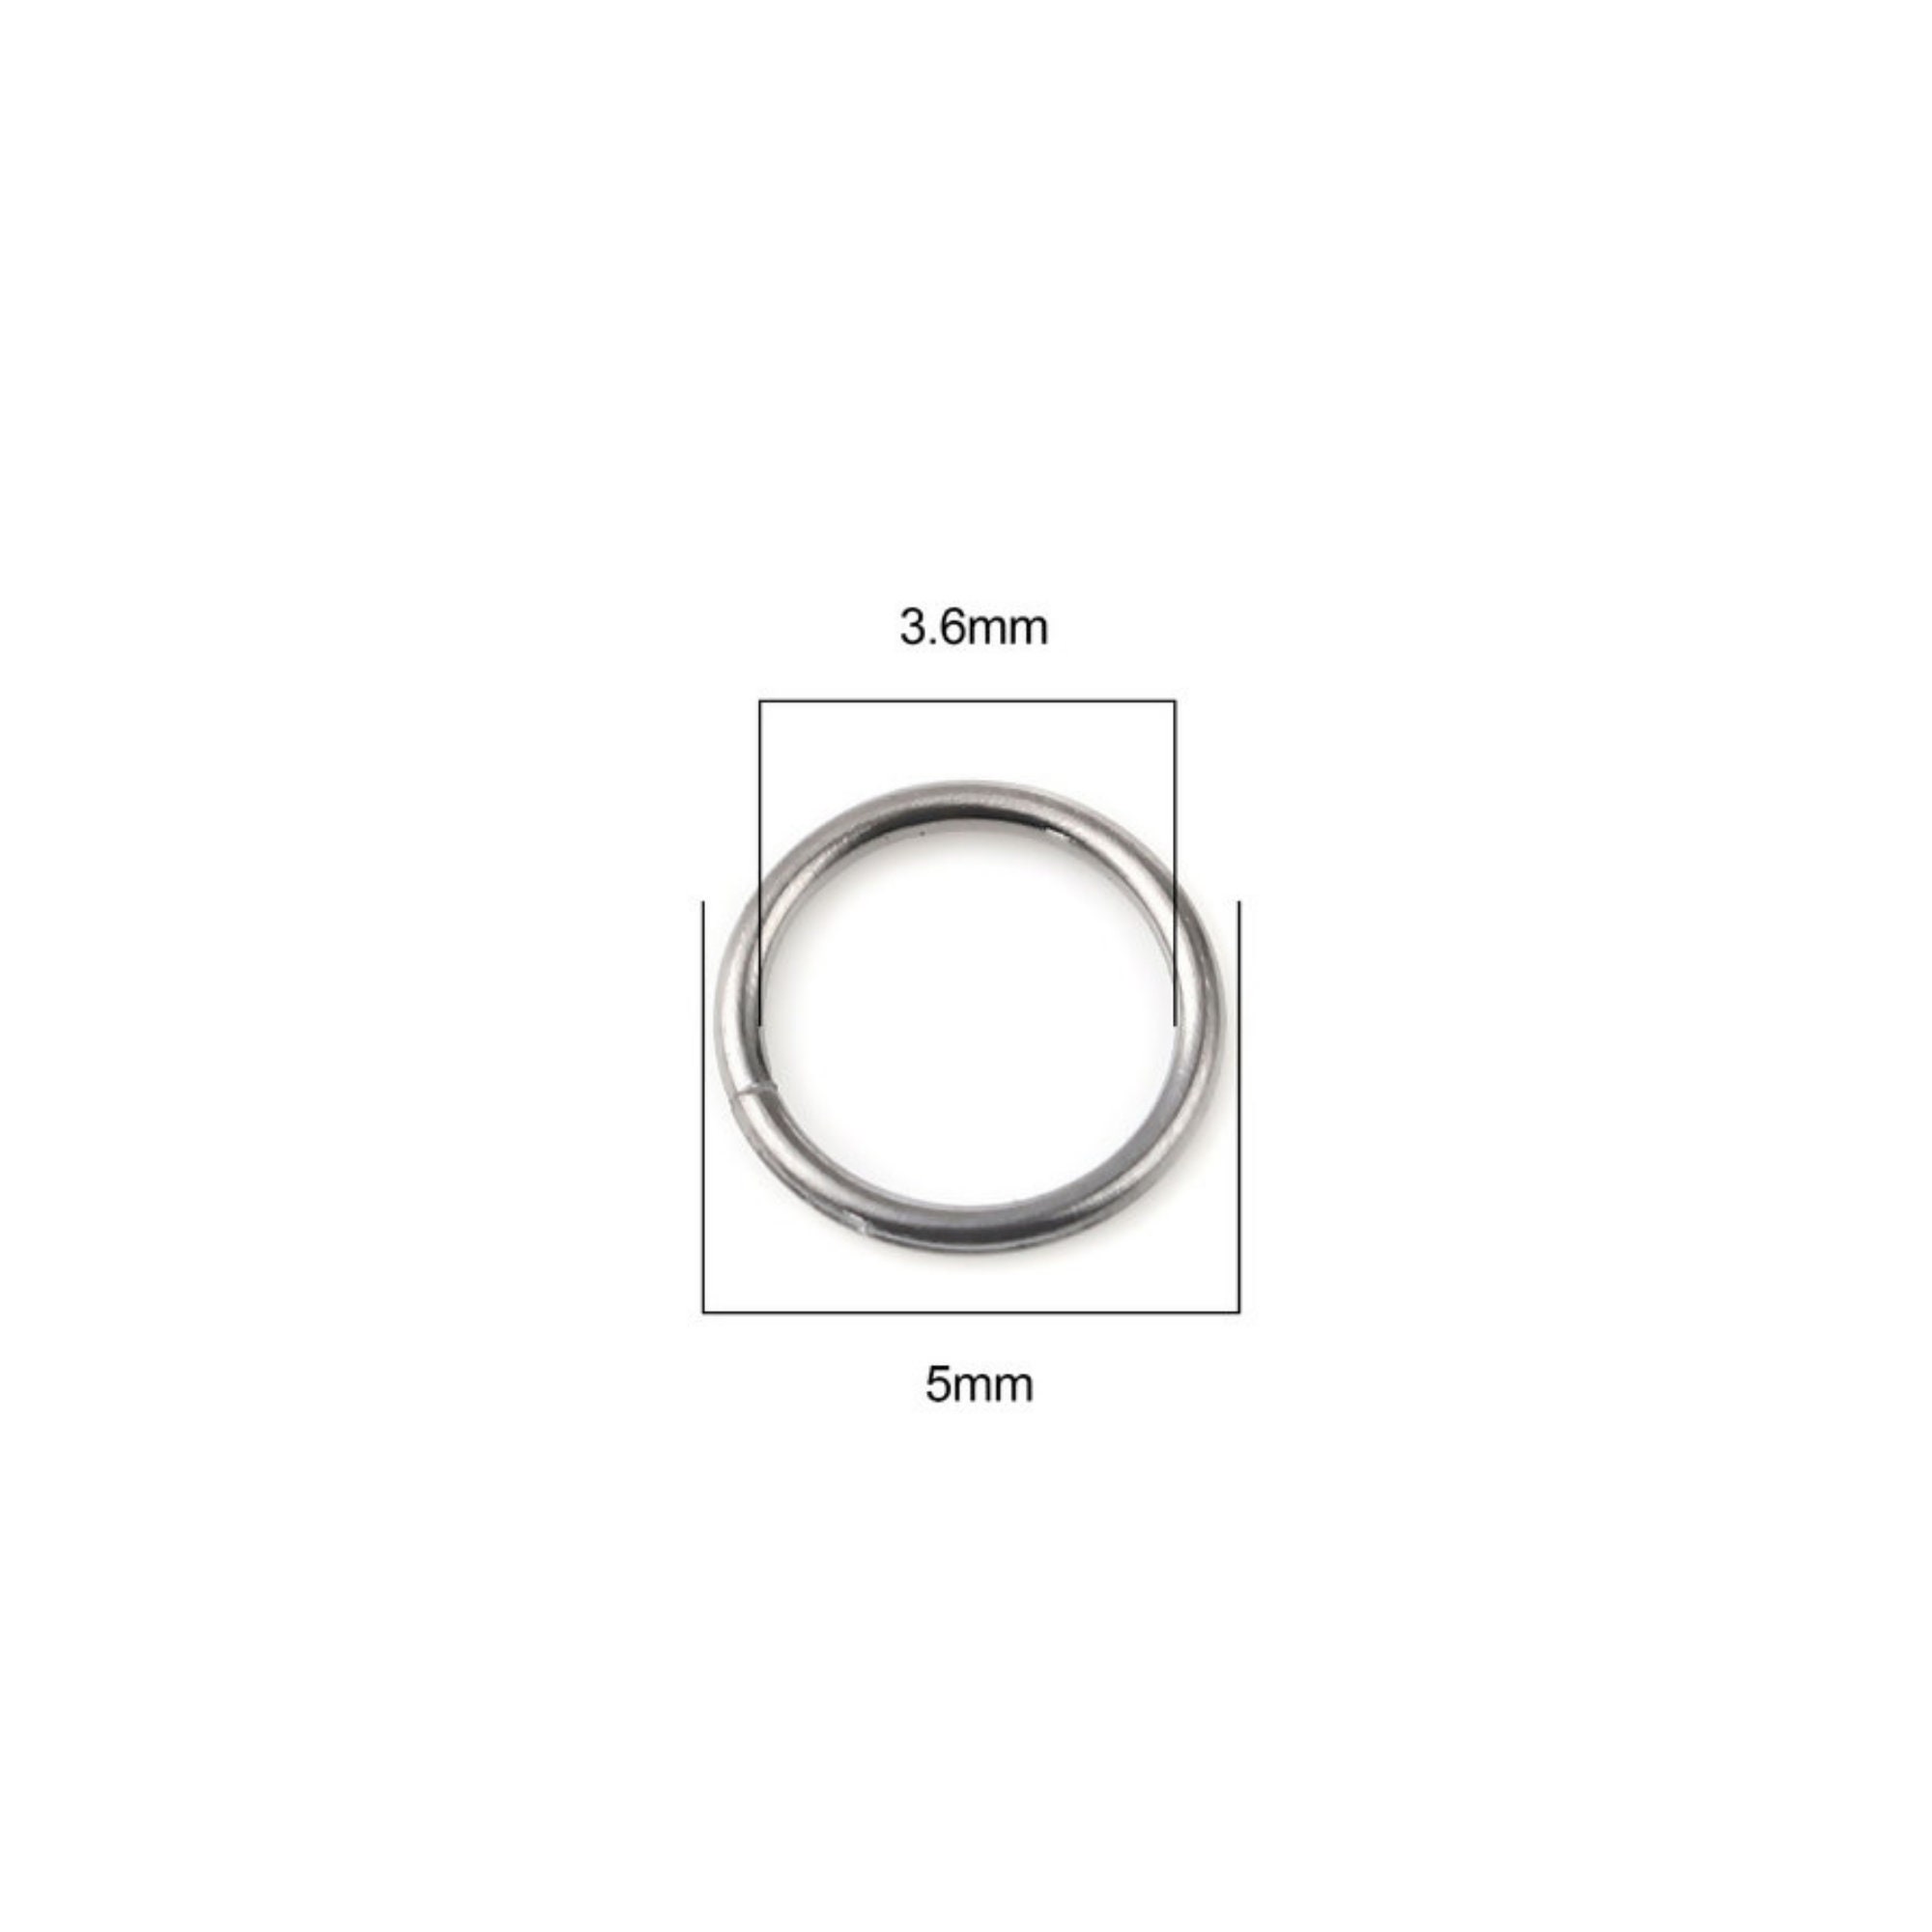 5mm Silver Jump Rings 21 Gauge Iron Based Alloy 100pcs 5mm X 0.7mm 